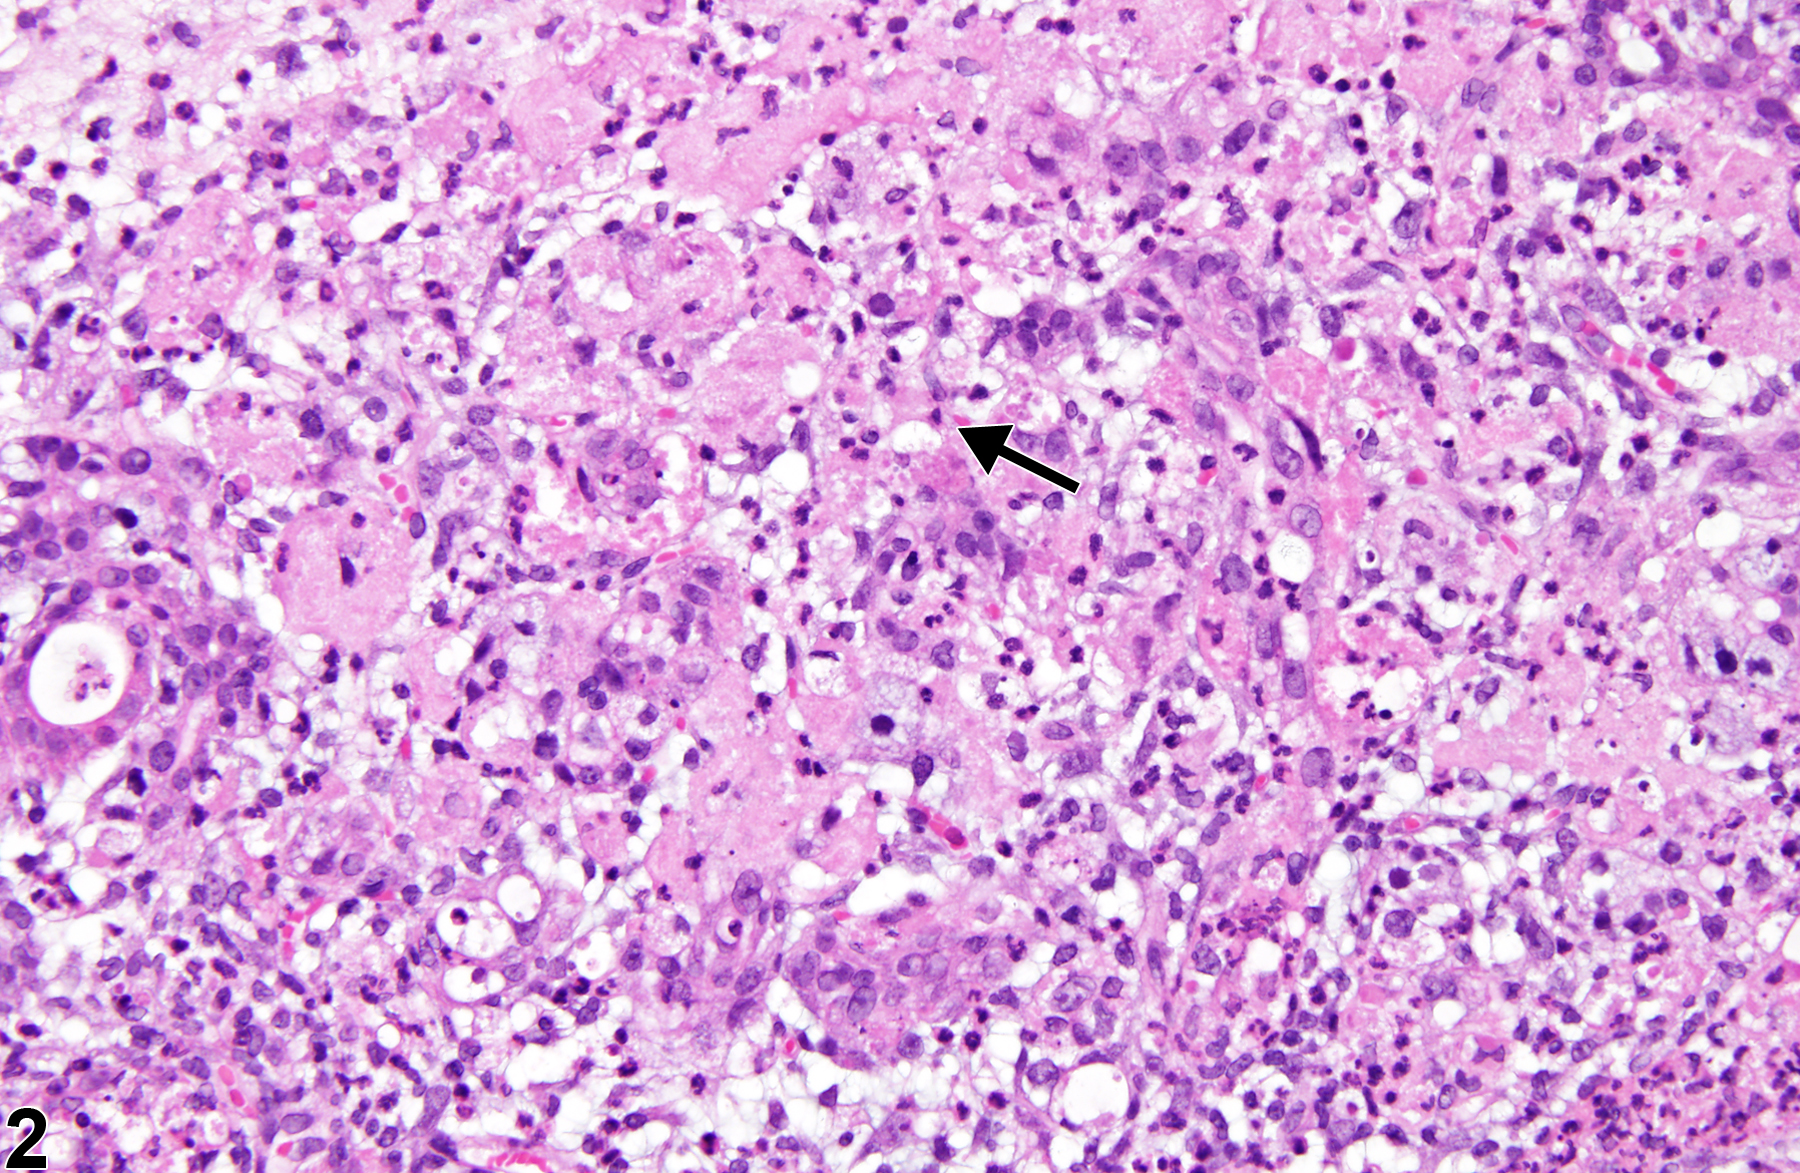 Image of necrosis in the salivary gland from a male F344/N rat in a subchronic study